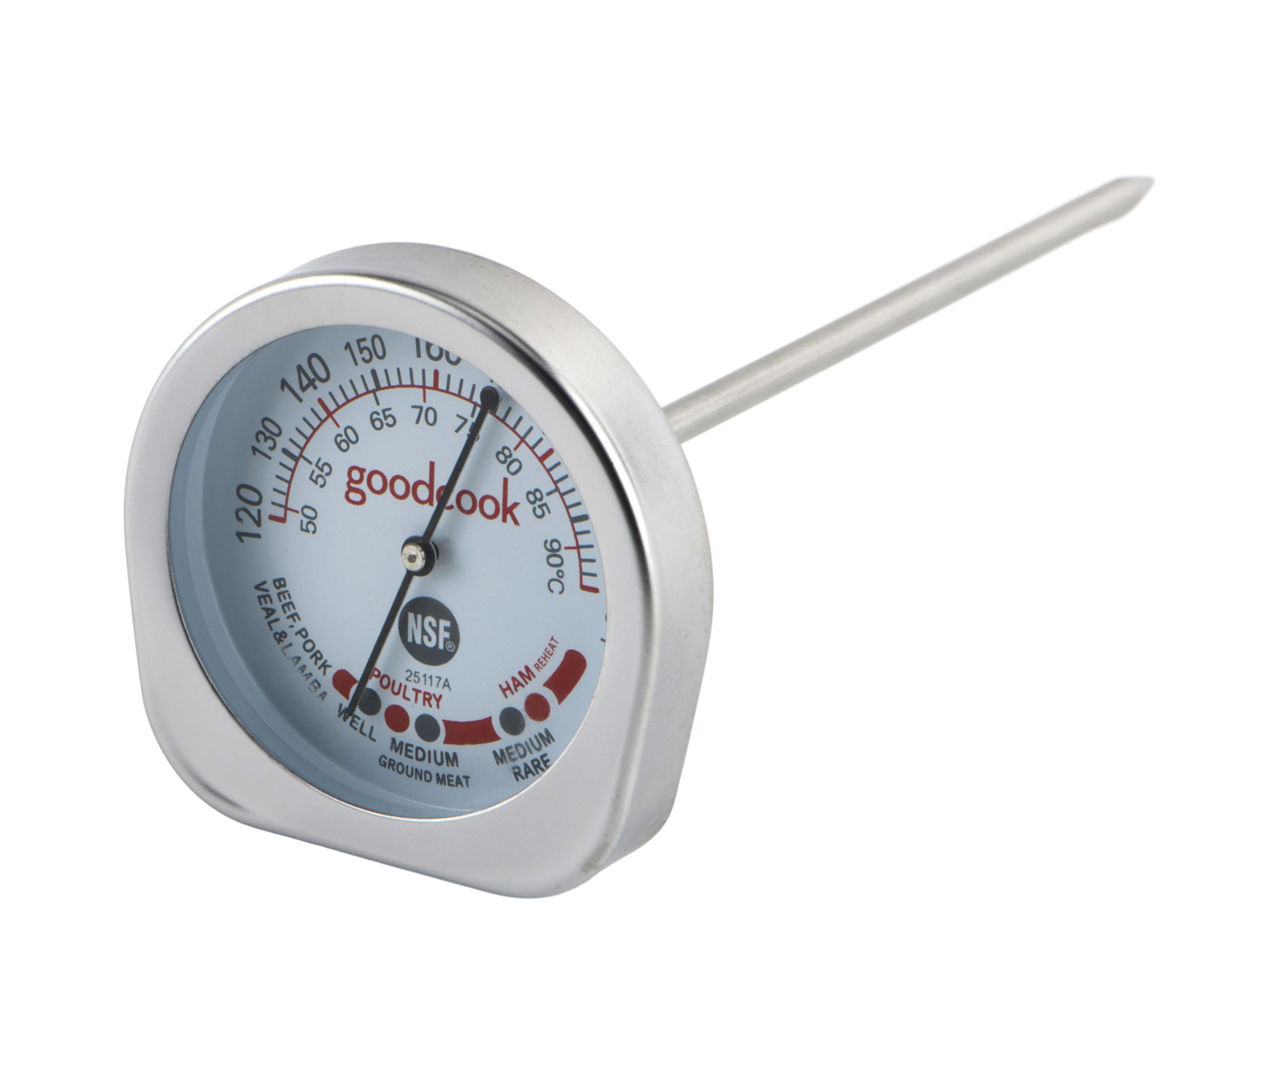 The best meat thermometers are on sale right now for a huge discount